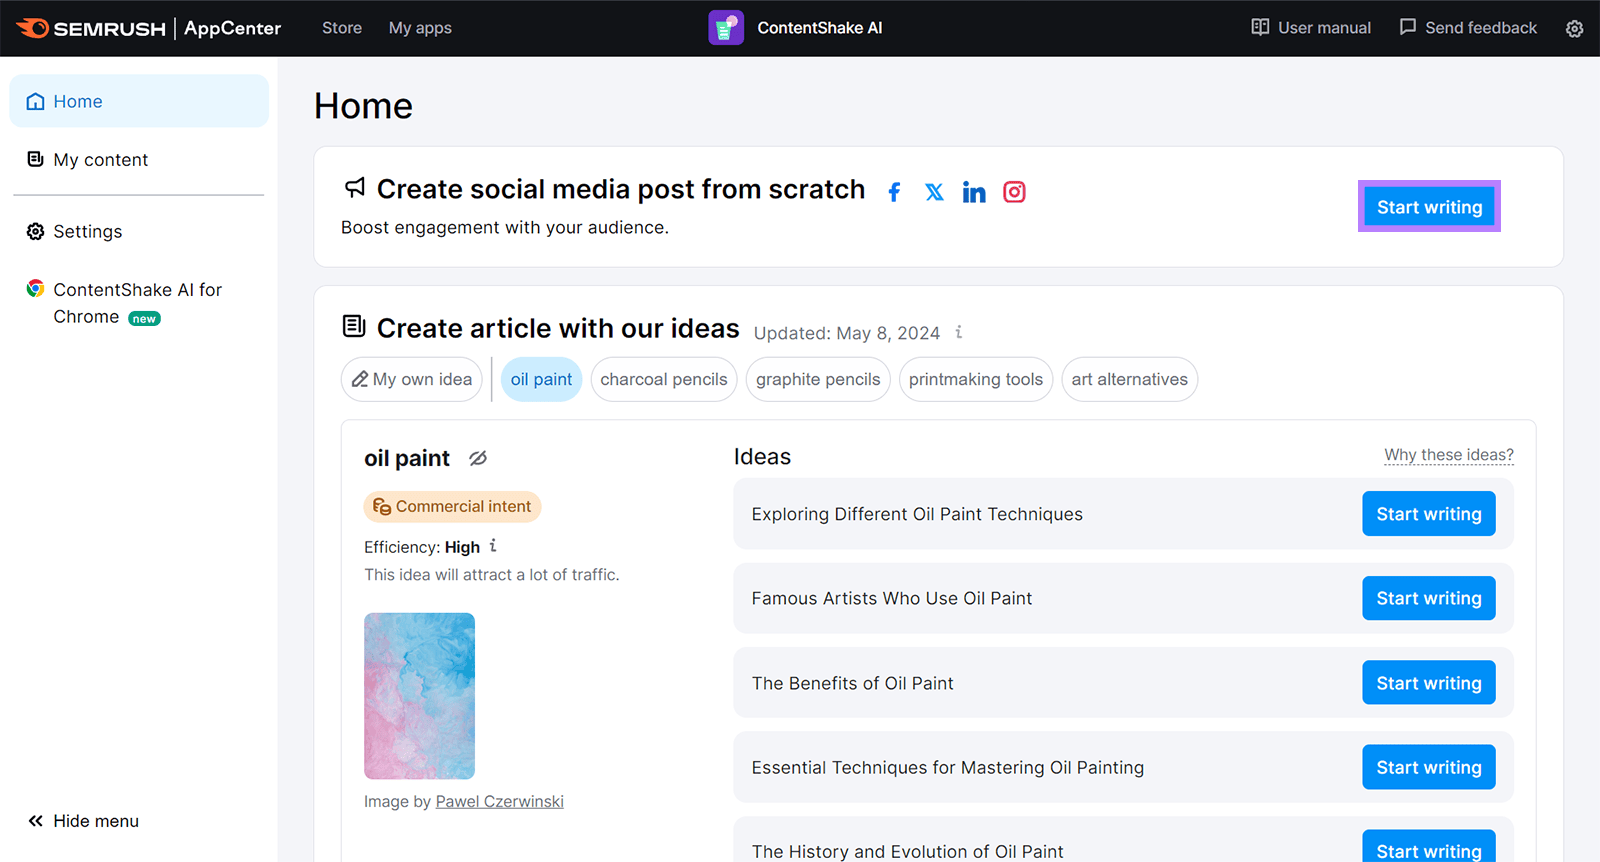 ContentShake AI home page with Start writing button highlighted.